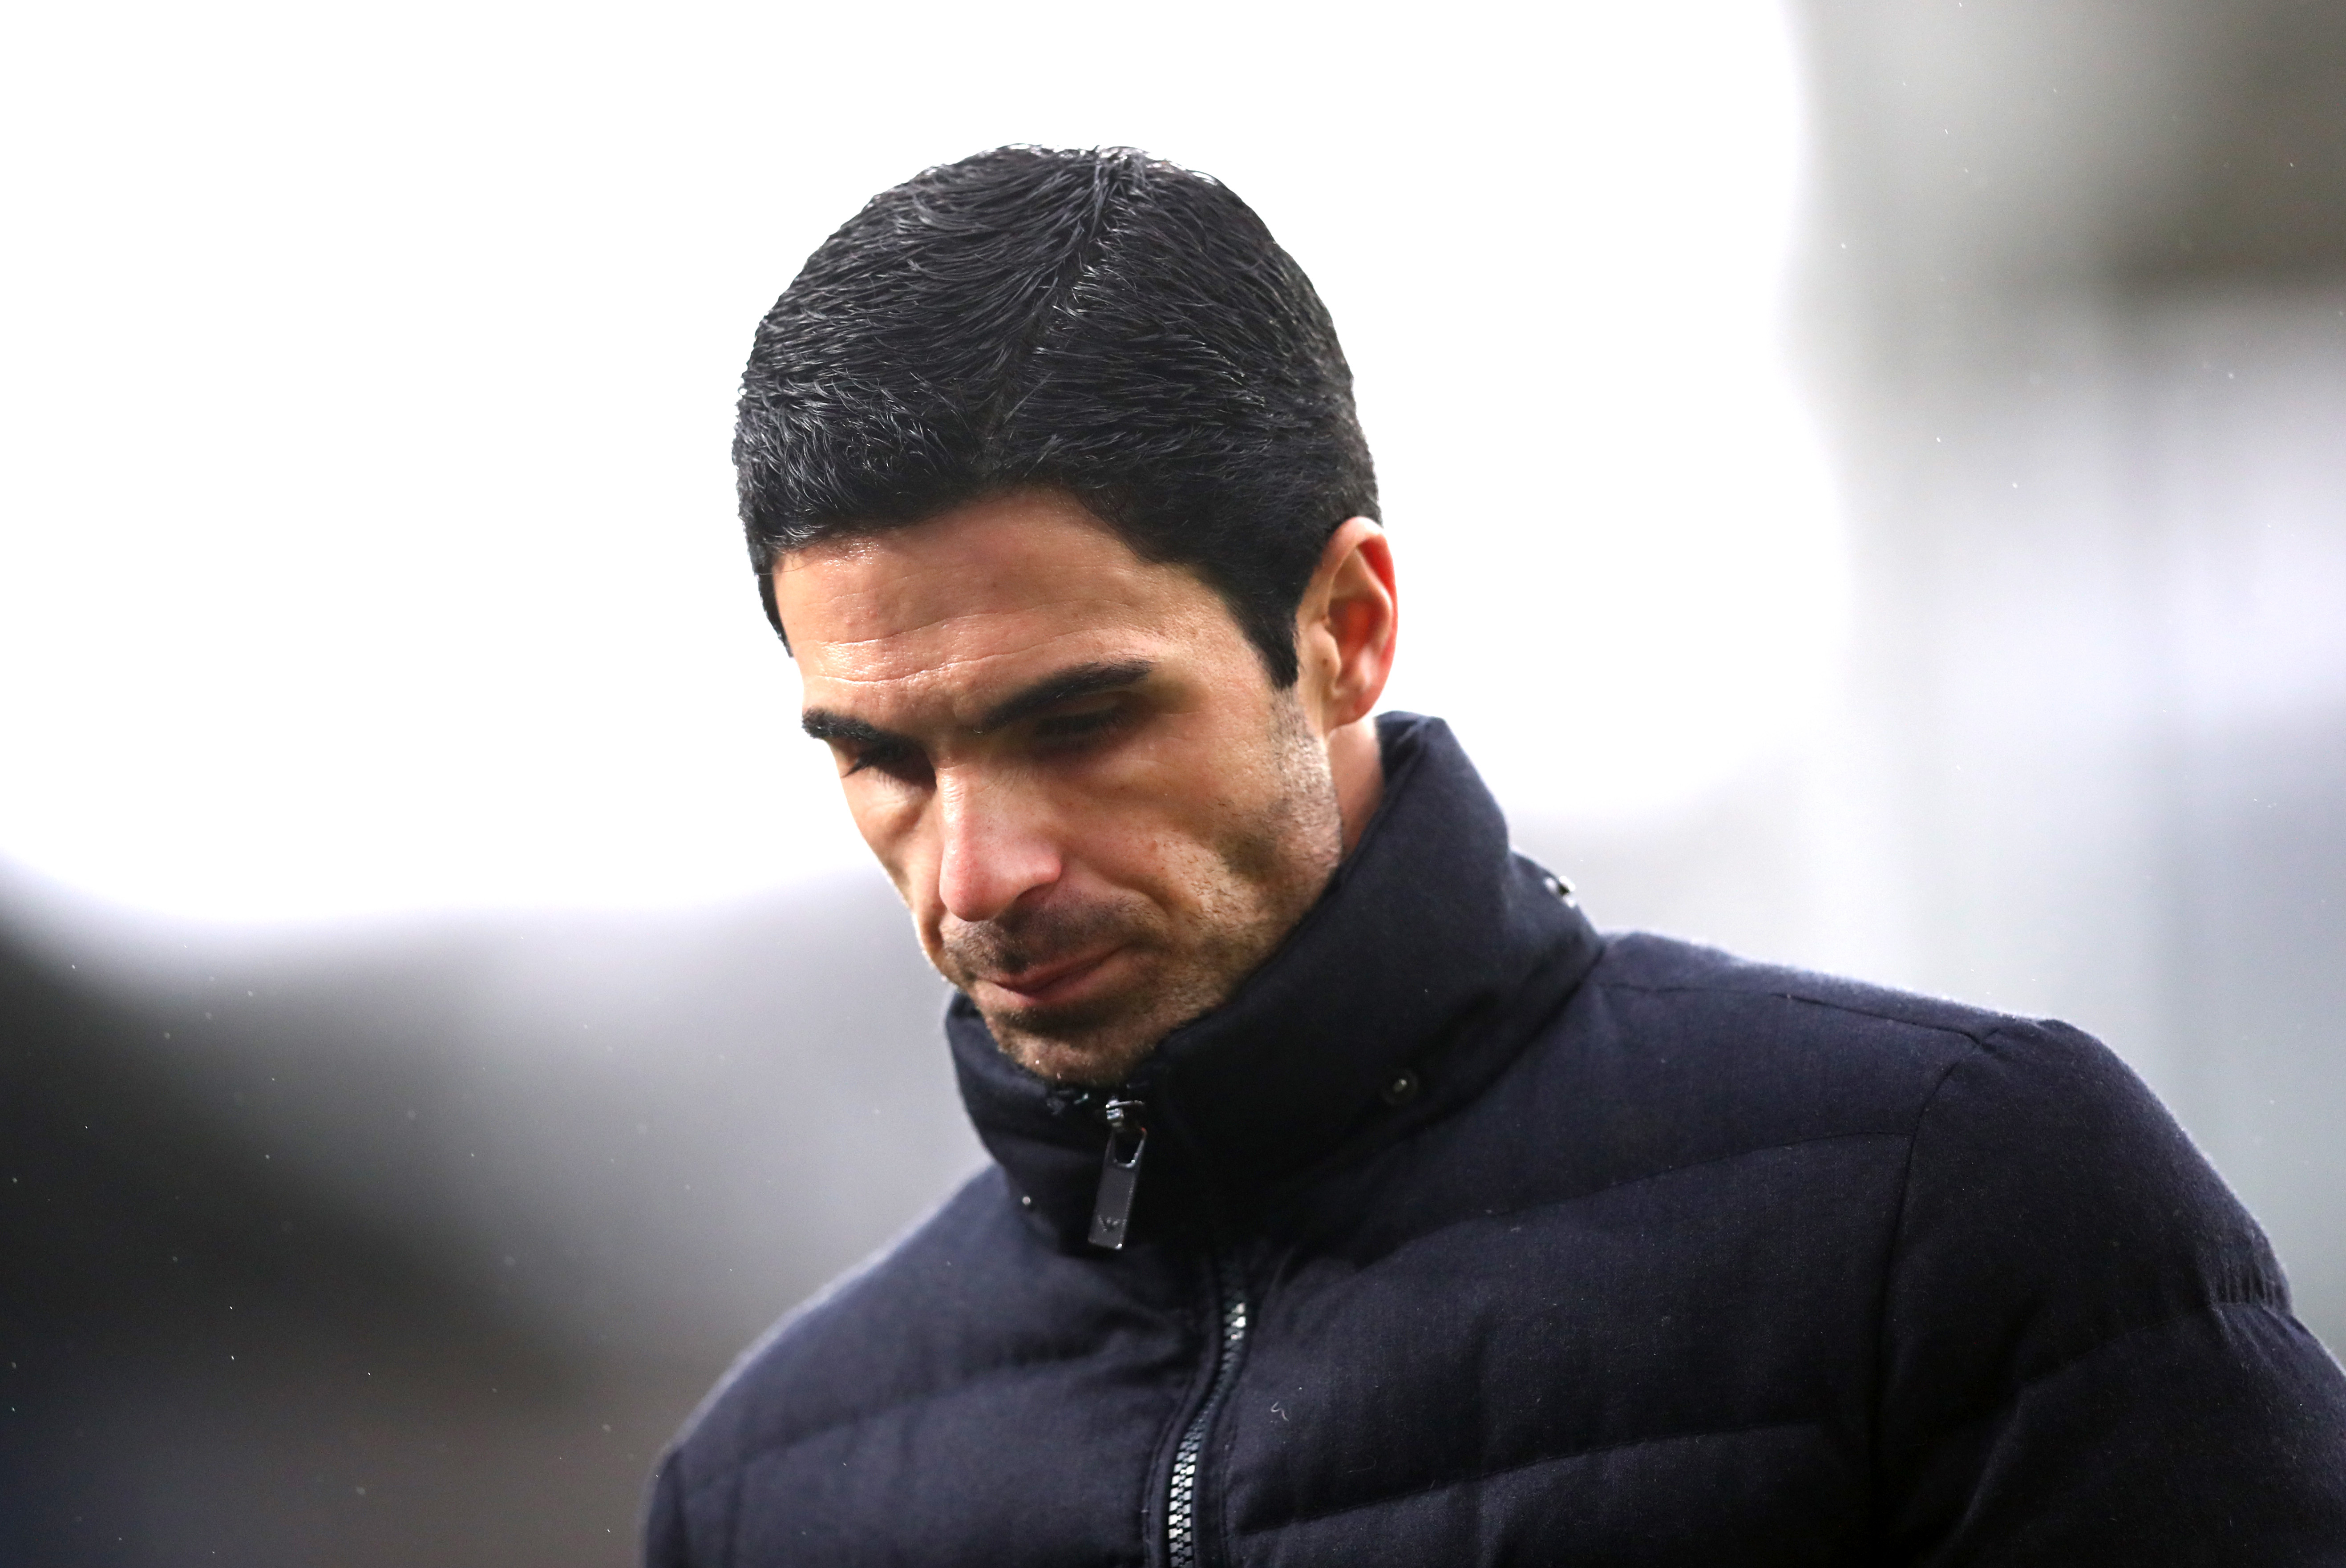 Arteta's arrival has brought in a buoyant mood at Arsenal (Photo by Dan Istitene/Getty Images)